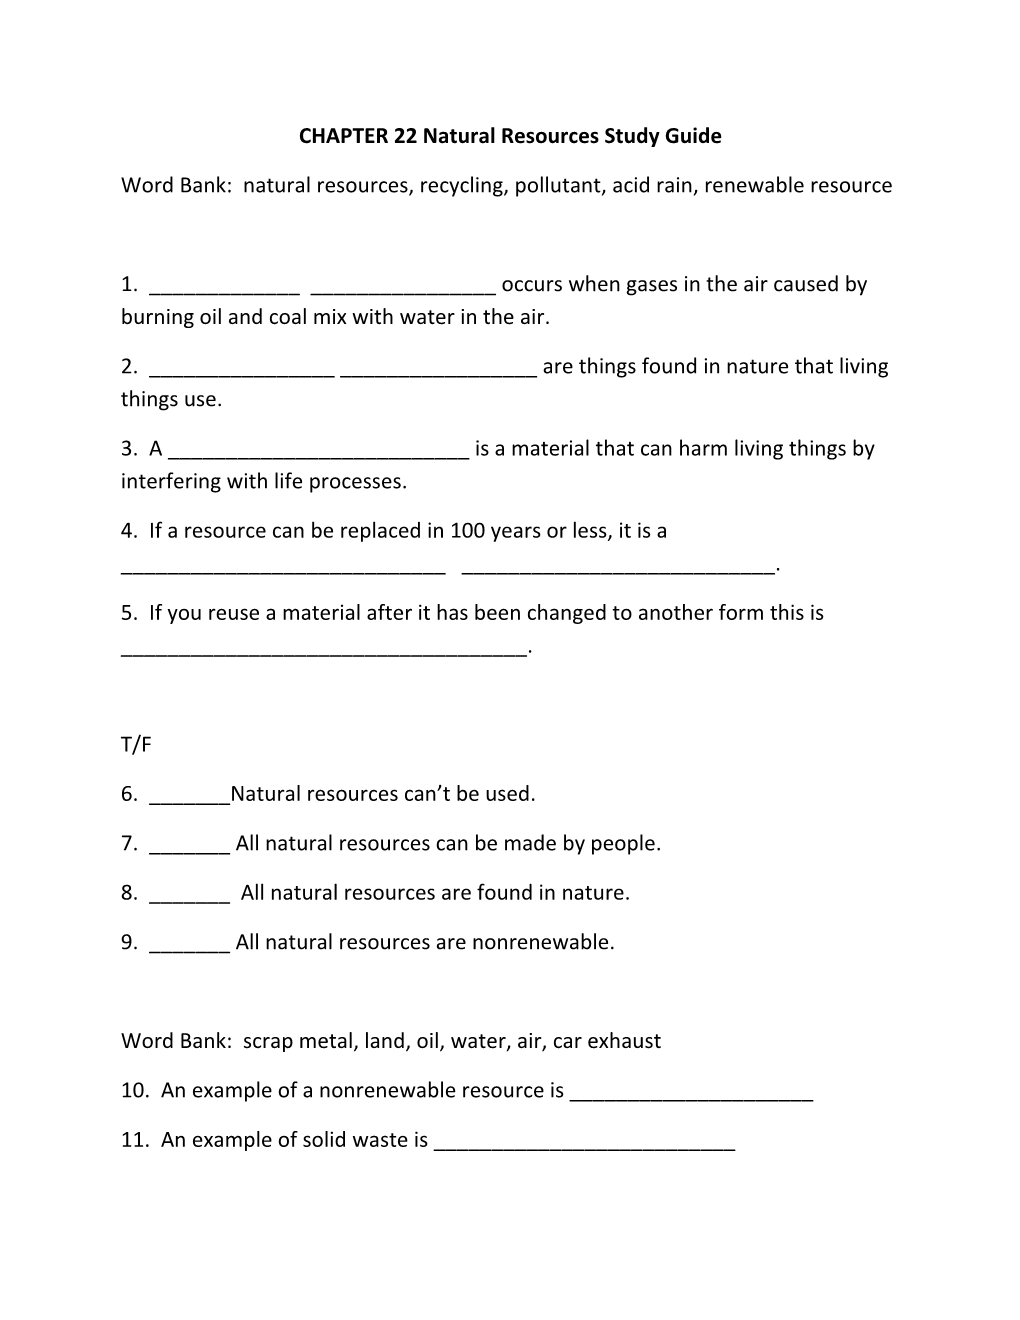 CHAPTER 22 Natural Resources Study Guide